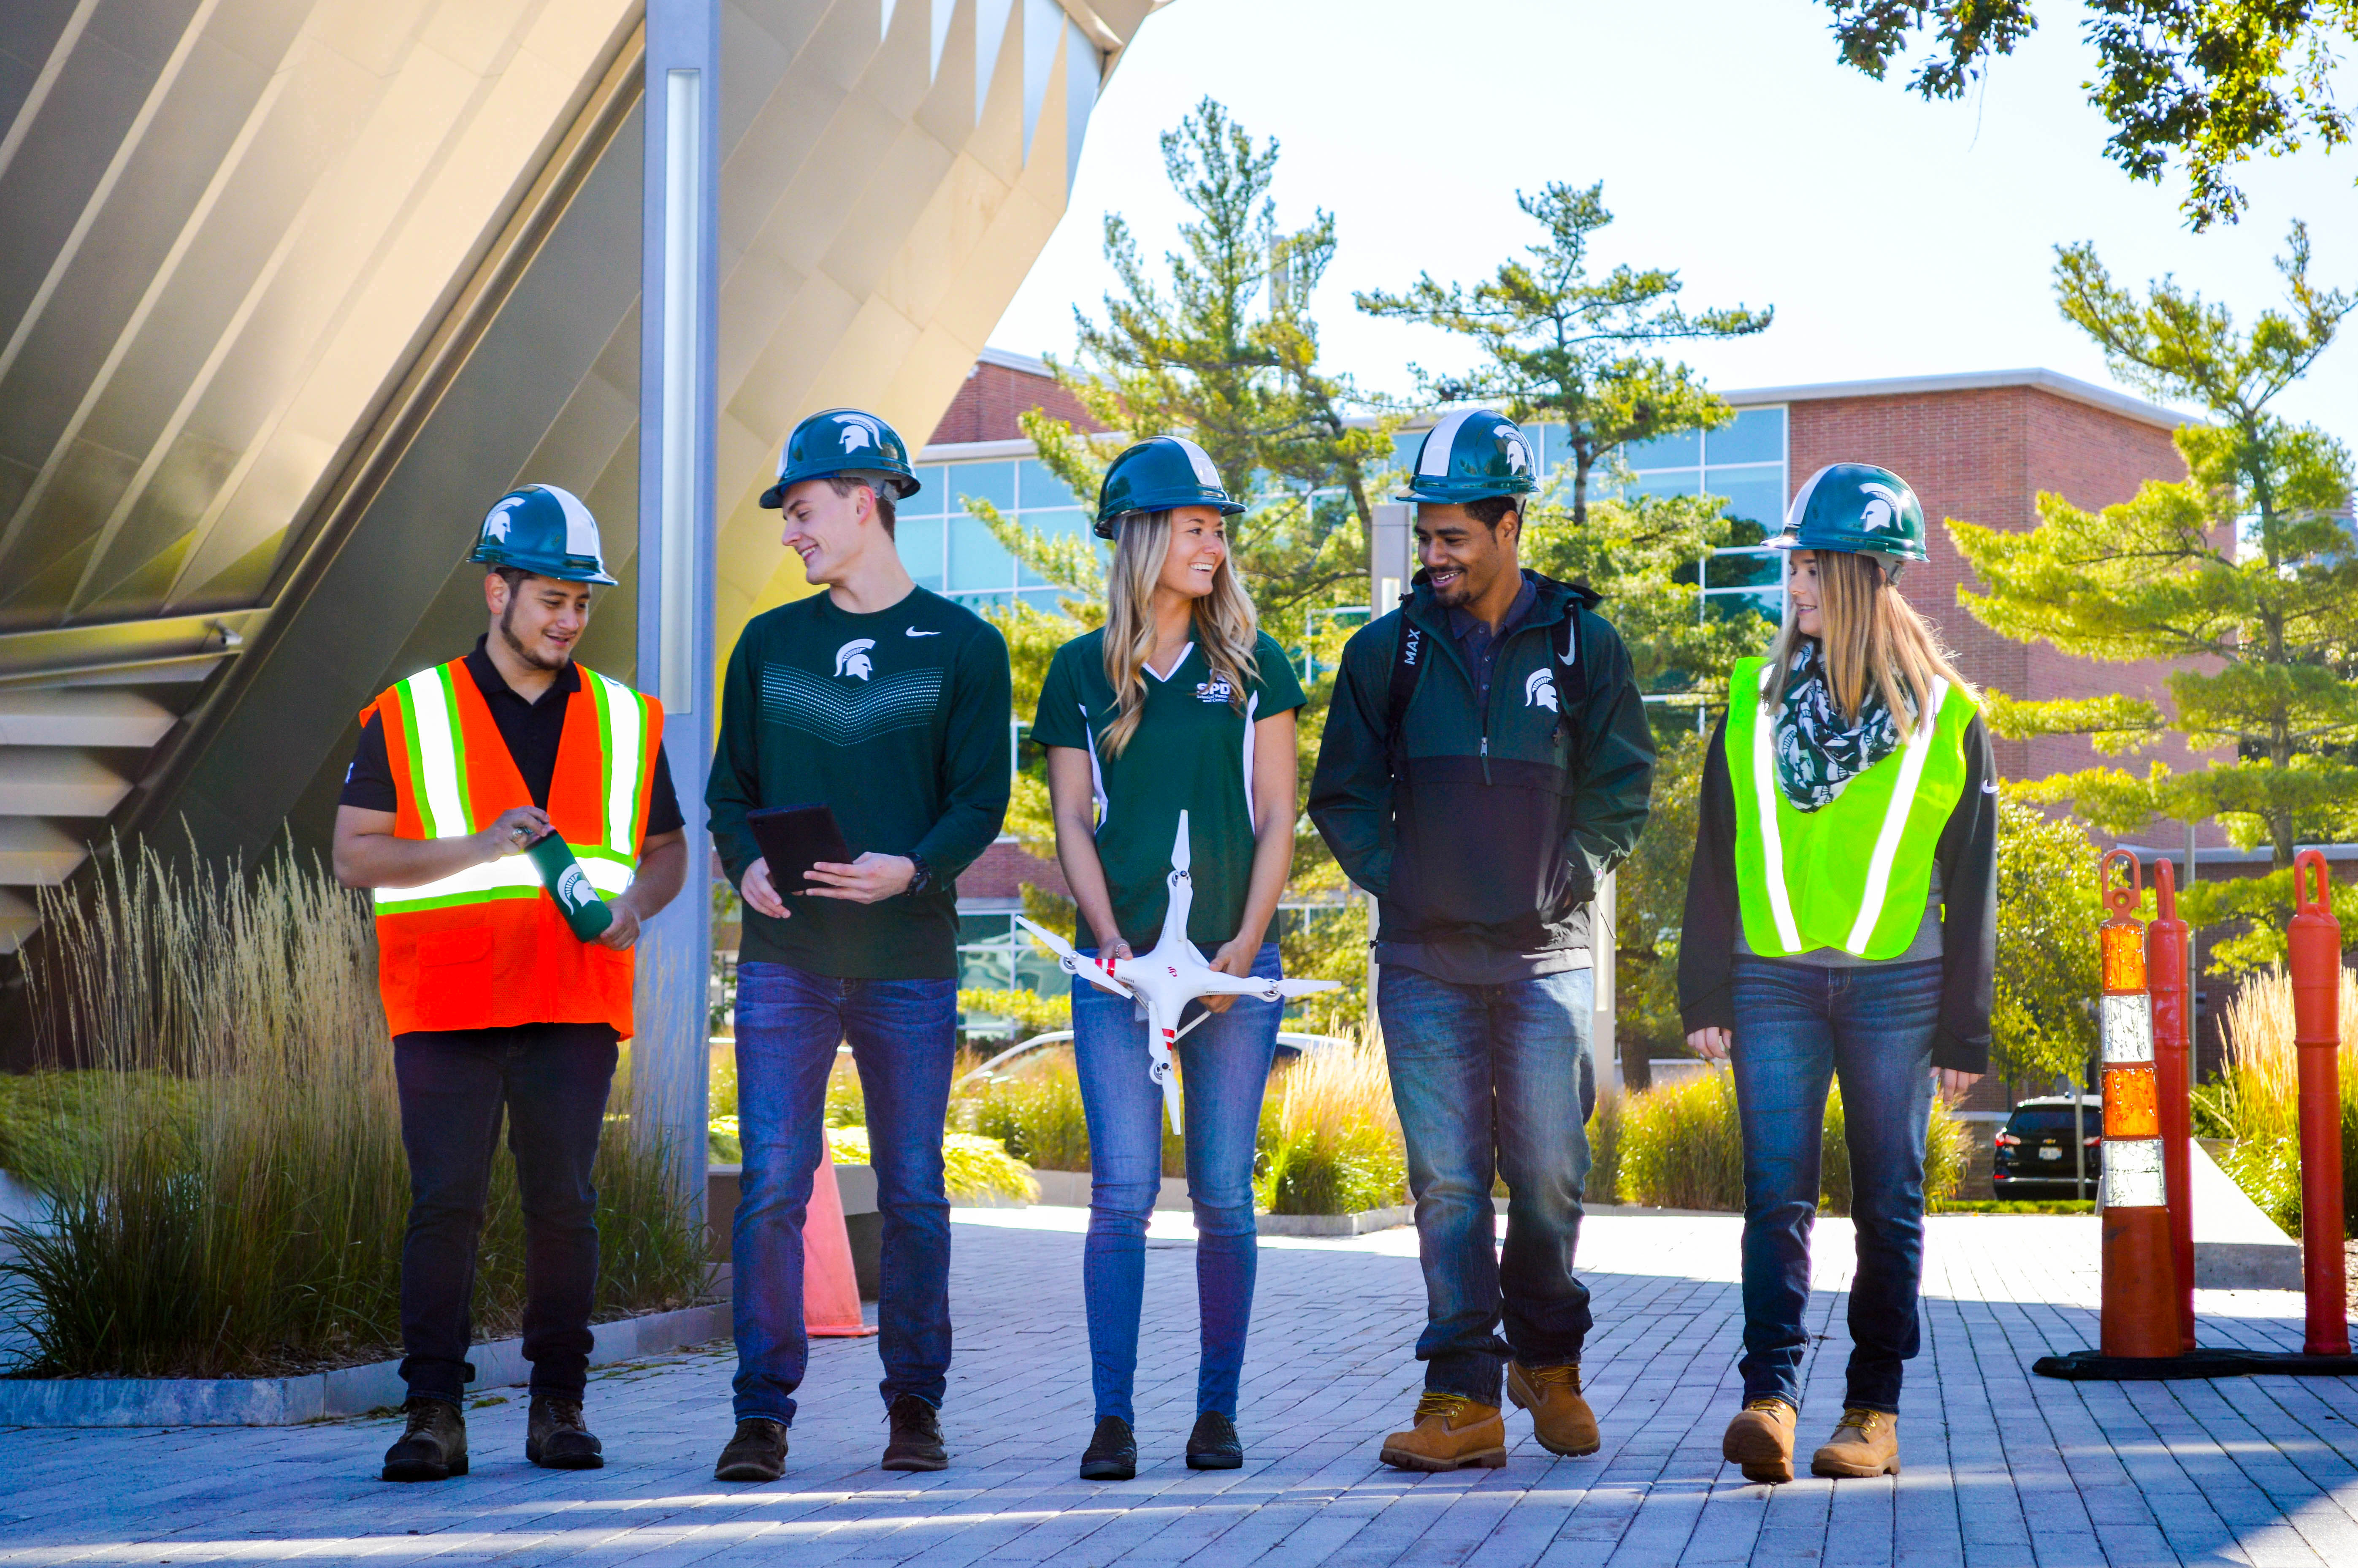 Construction management students walking together and talking.